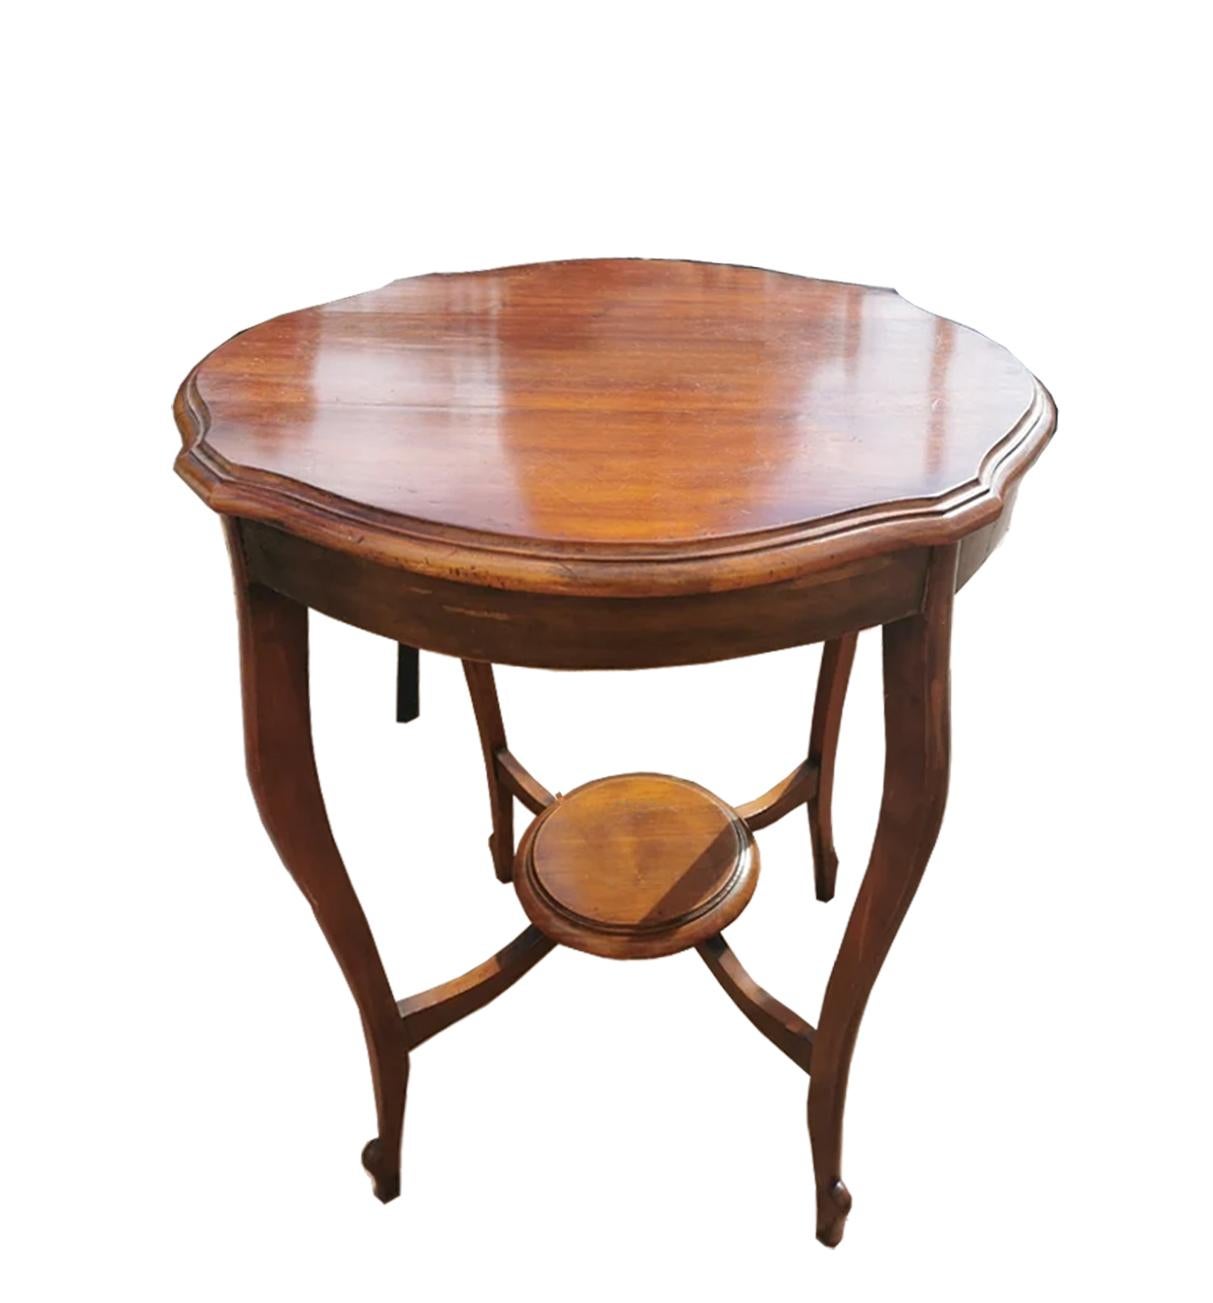 Round side table features barley twist legs, 

This table is raised on a base composed of four turned legs 

They are in very good condition,

End table small table, side table, round table, living room table, small table
salomonica columns,